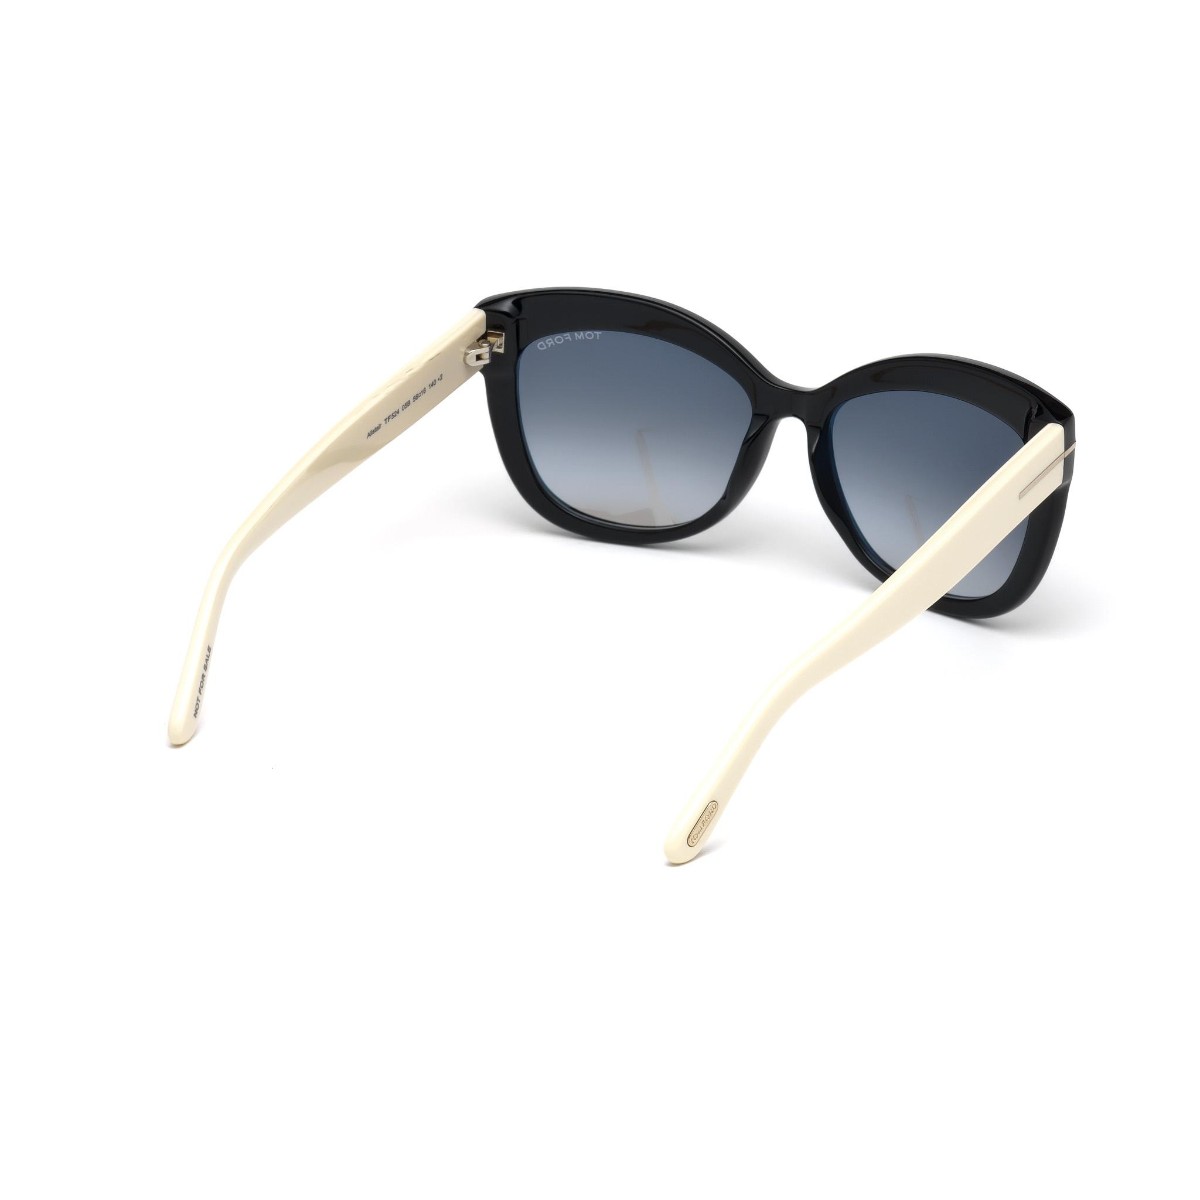 Tom Ford - TF524 05B Black with Beige Temples